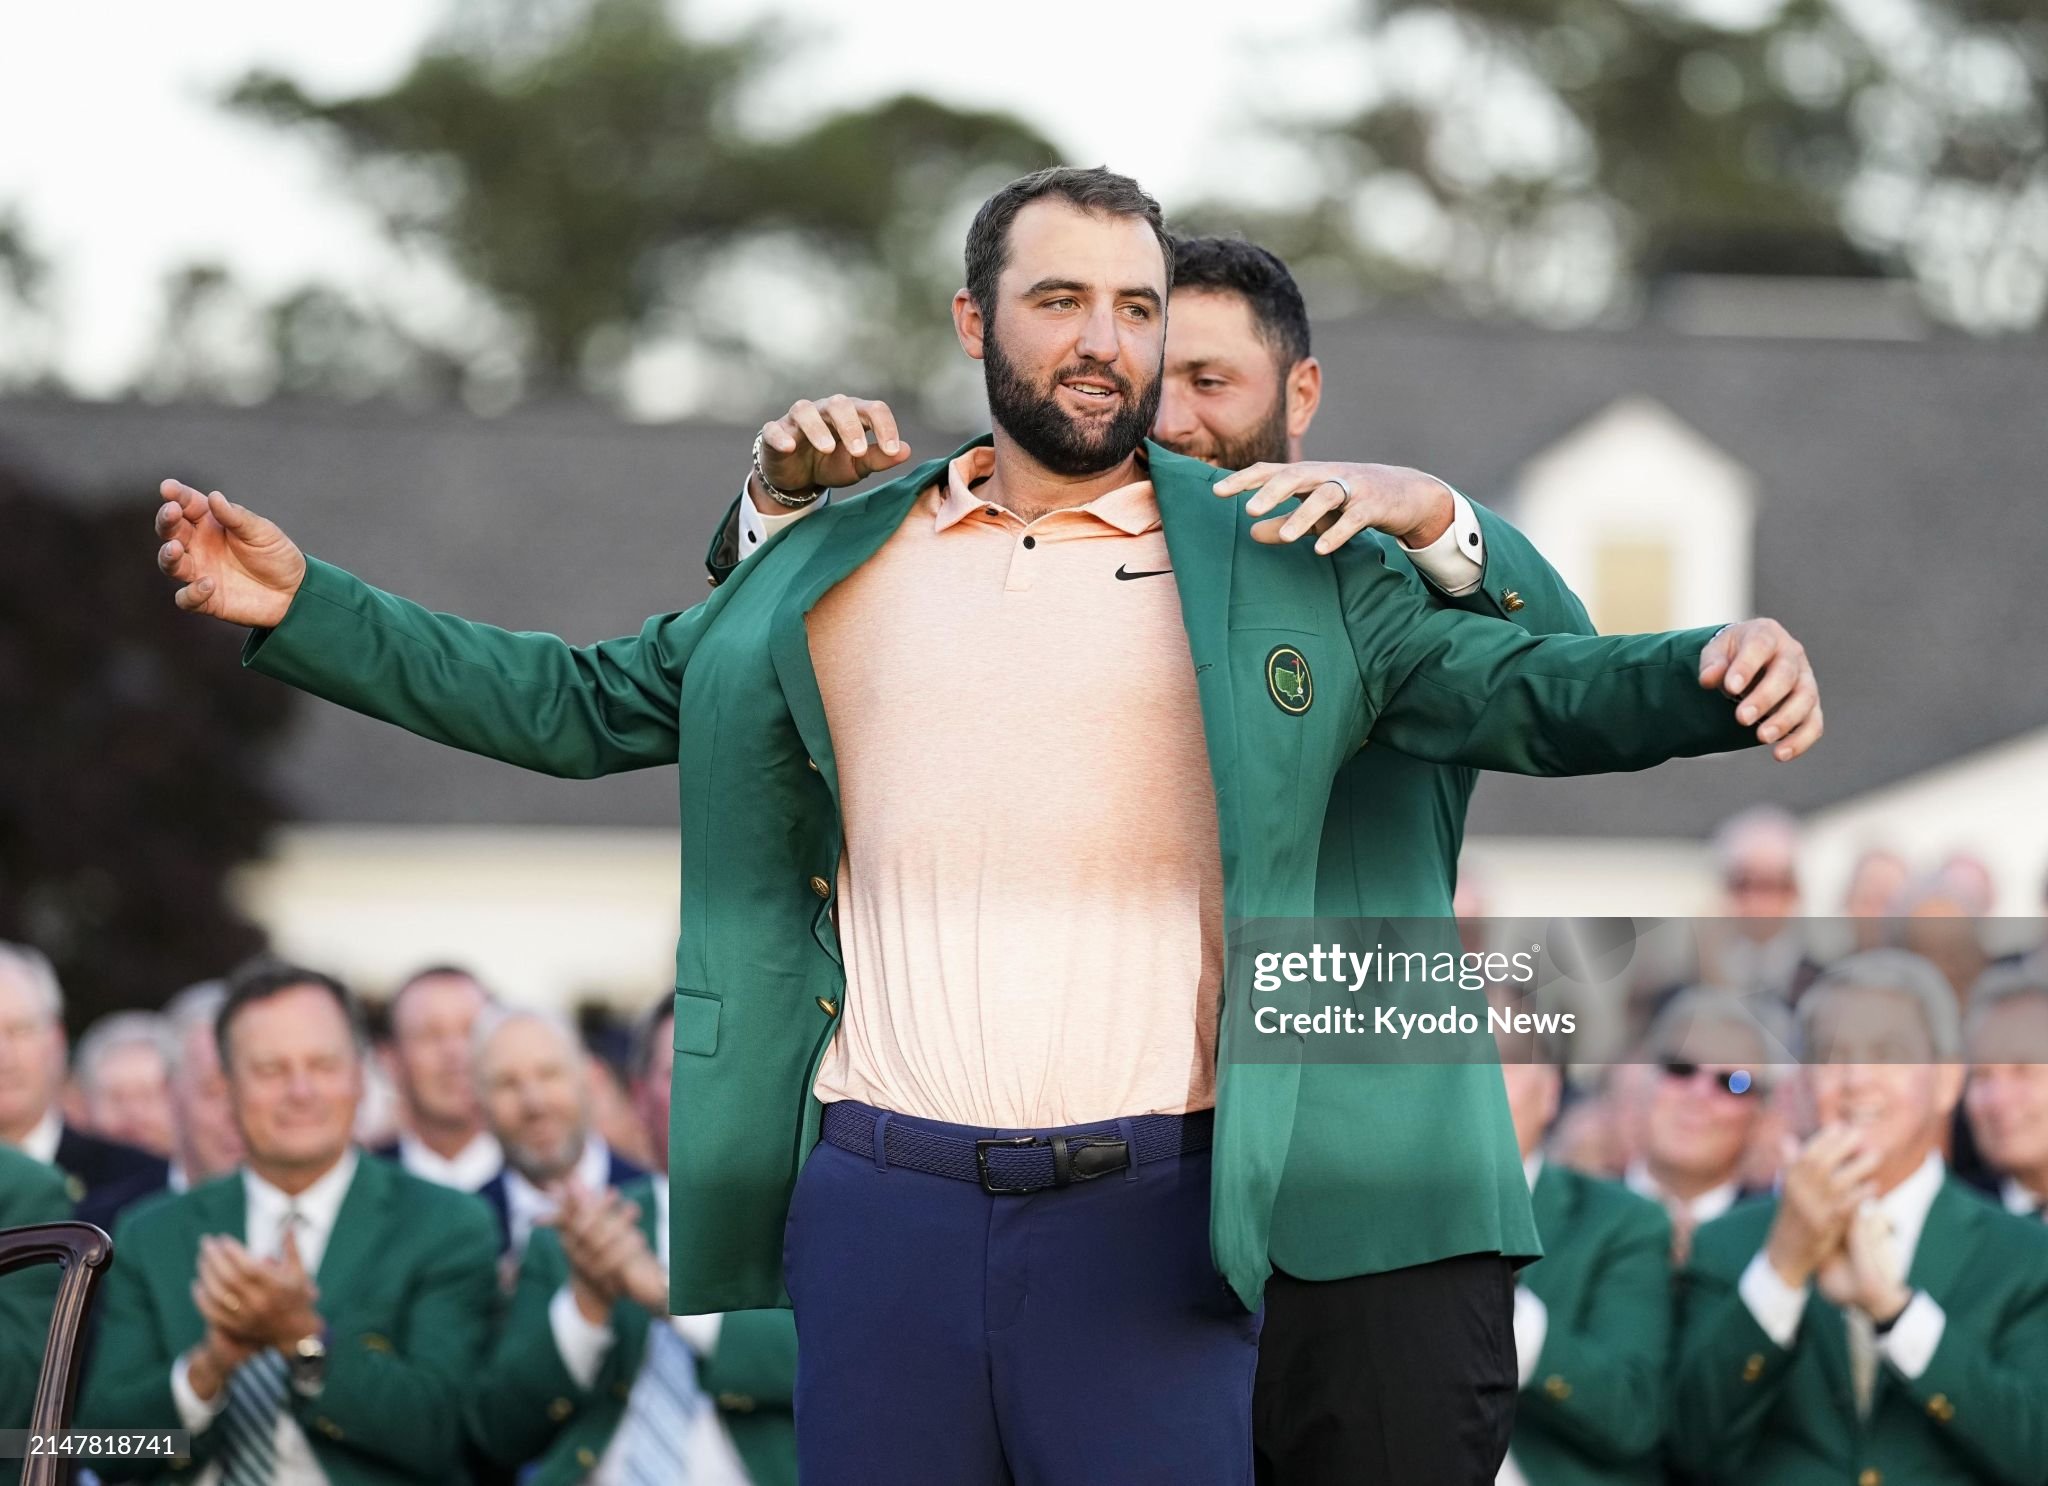 New Masters champion Scottie Scheffler (front) of the United States puts on his green jacket, given to him by last year's winner Jon Rahm of Spain, during a ceremony at Augusta National Golf Club in Augusta, Georgia, on April 14, 2024. (Photo by Kyodo News via Getty Images)